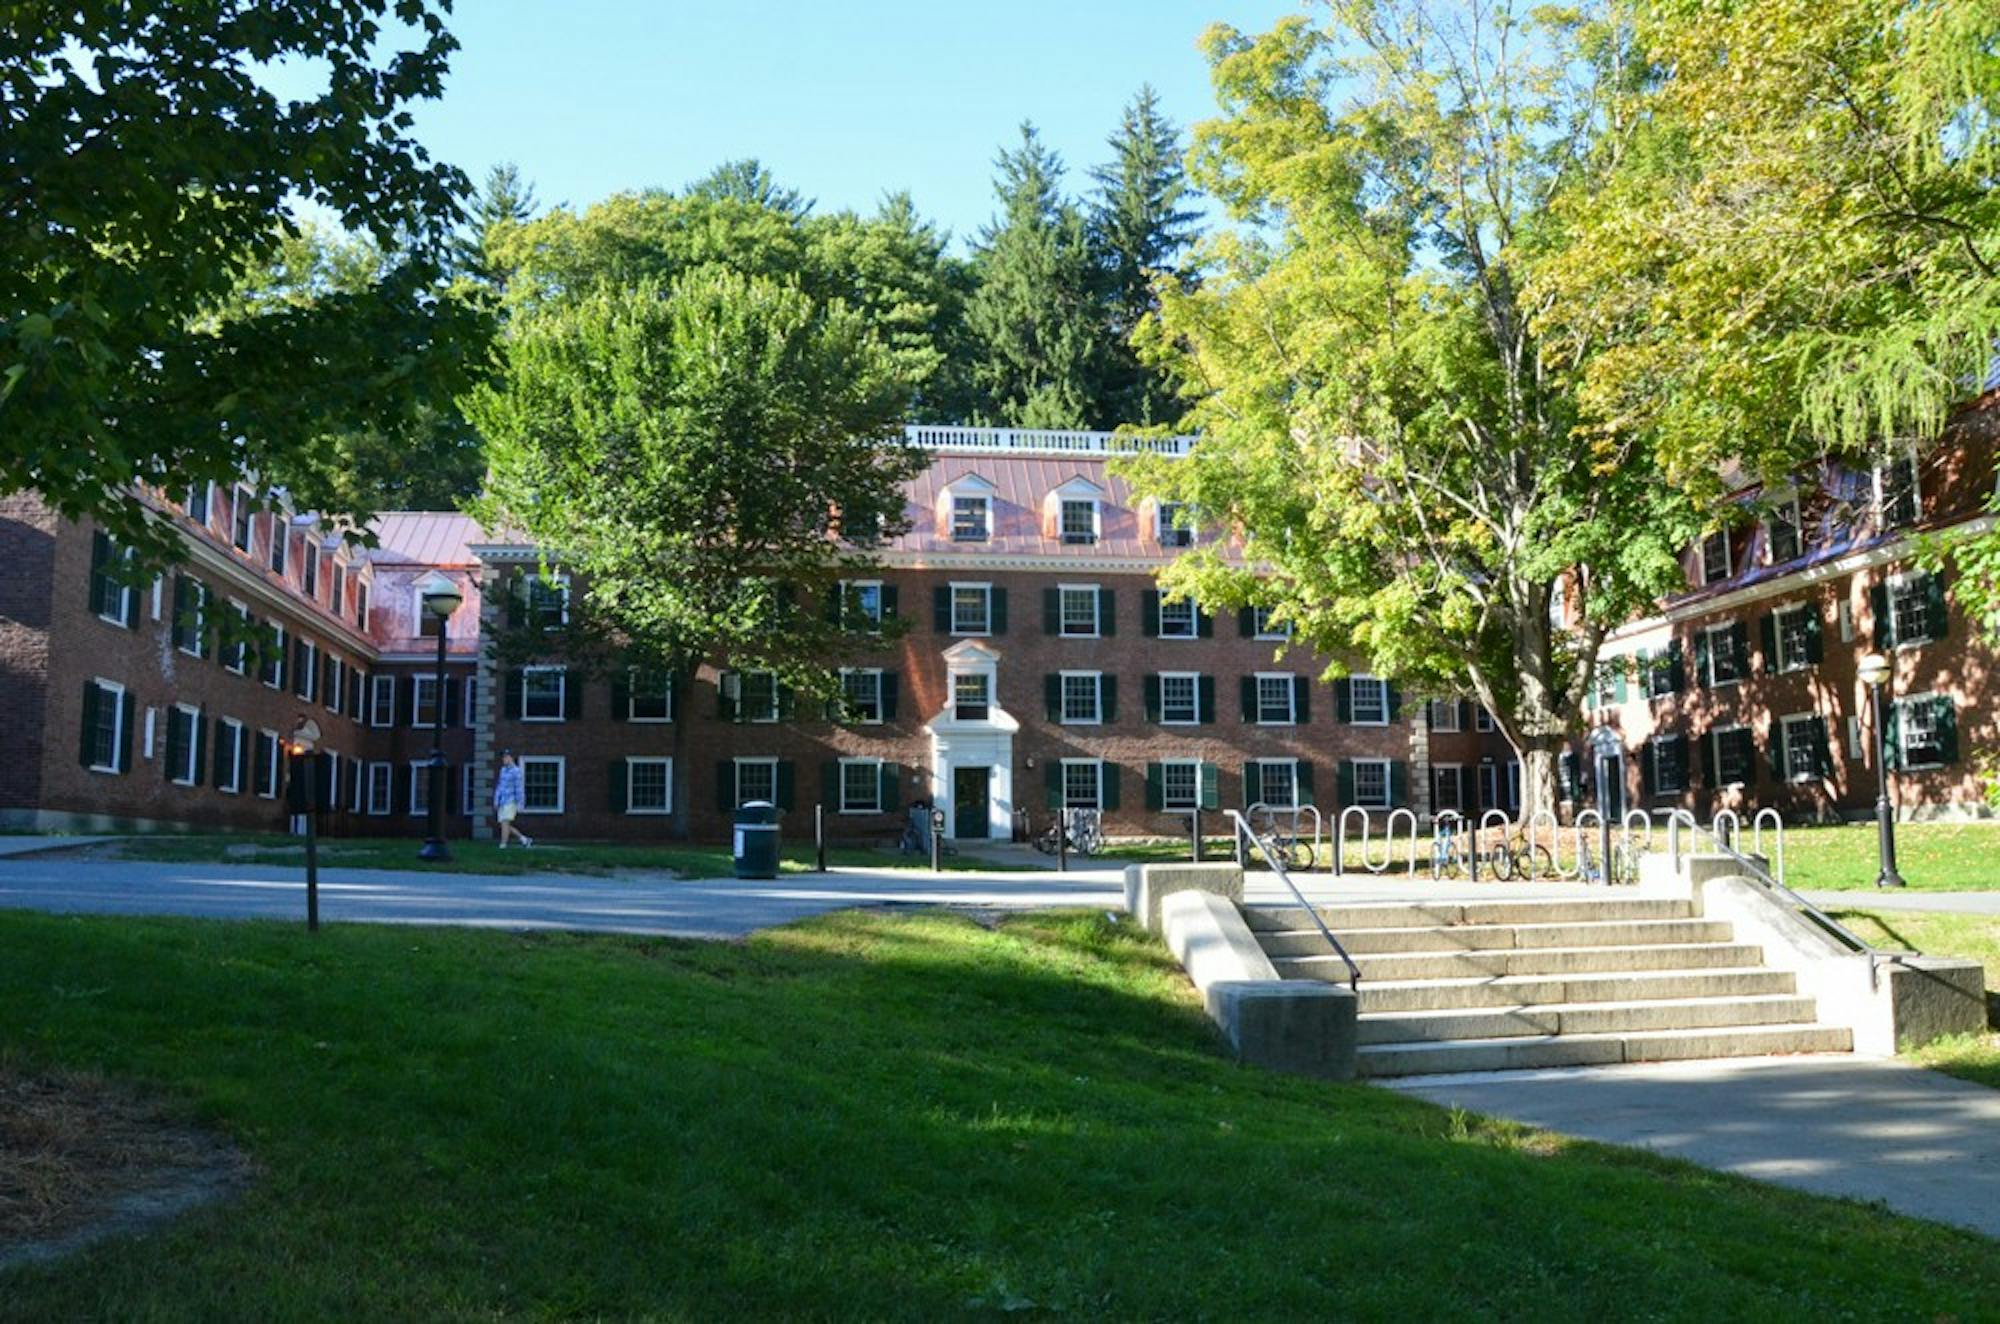 North Park House consists of Ripley, Smith and Woodward Halls.&nbsp;